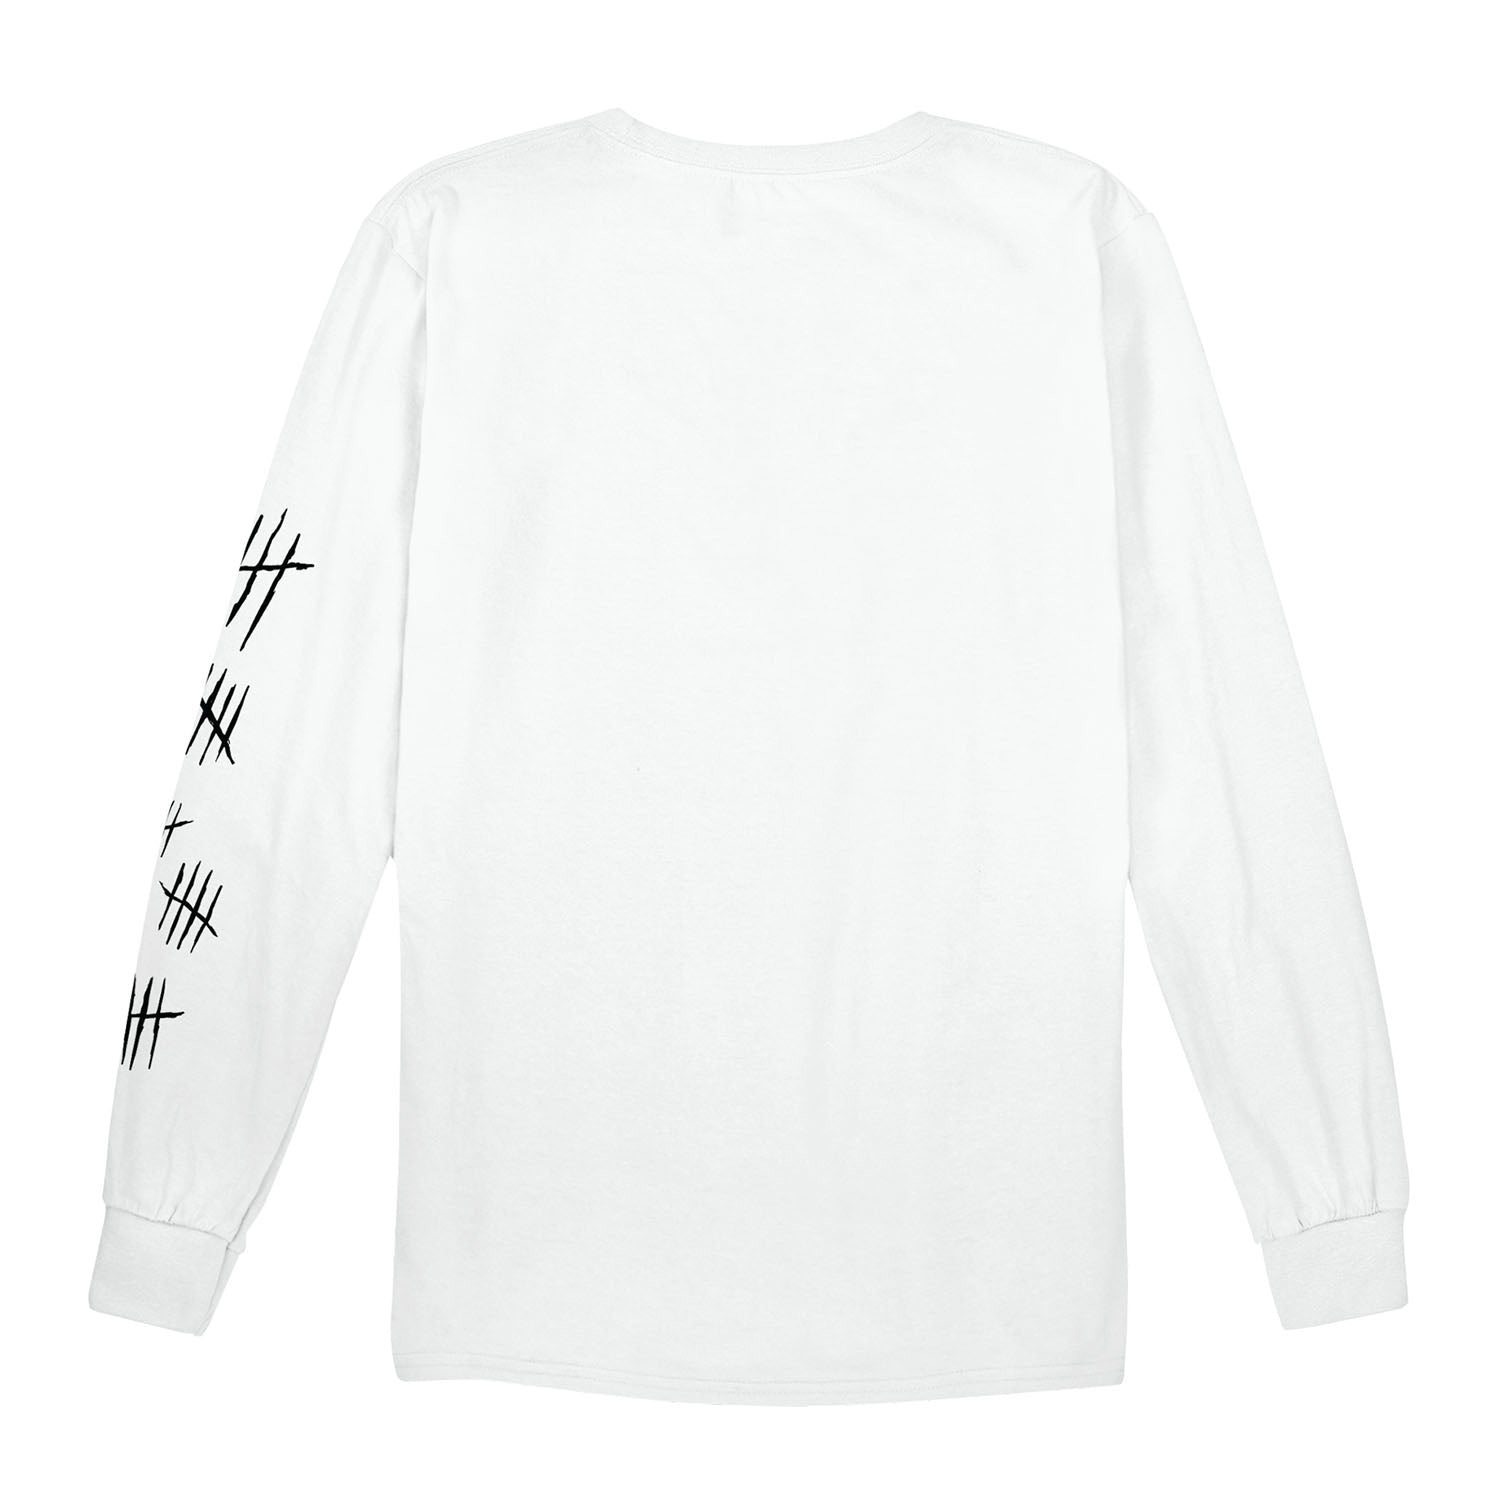 Call of Duty Warzone White Hash Marks Long Sleeve T-Shirt - Back View